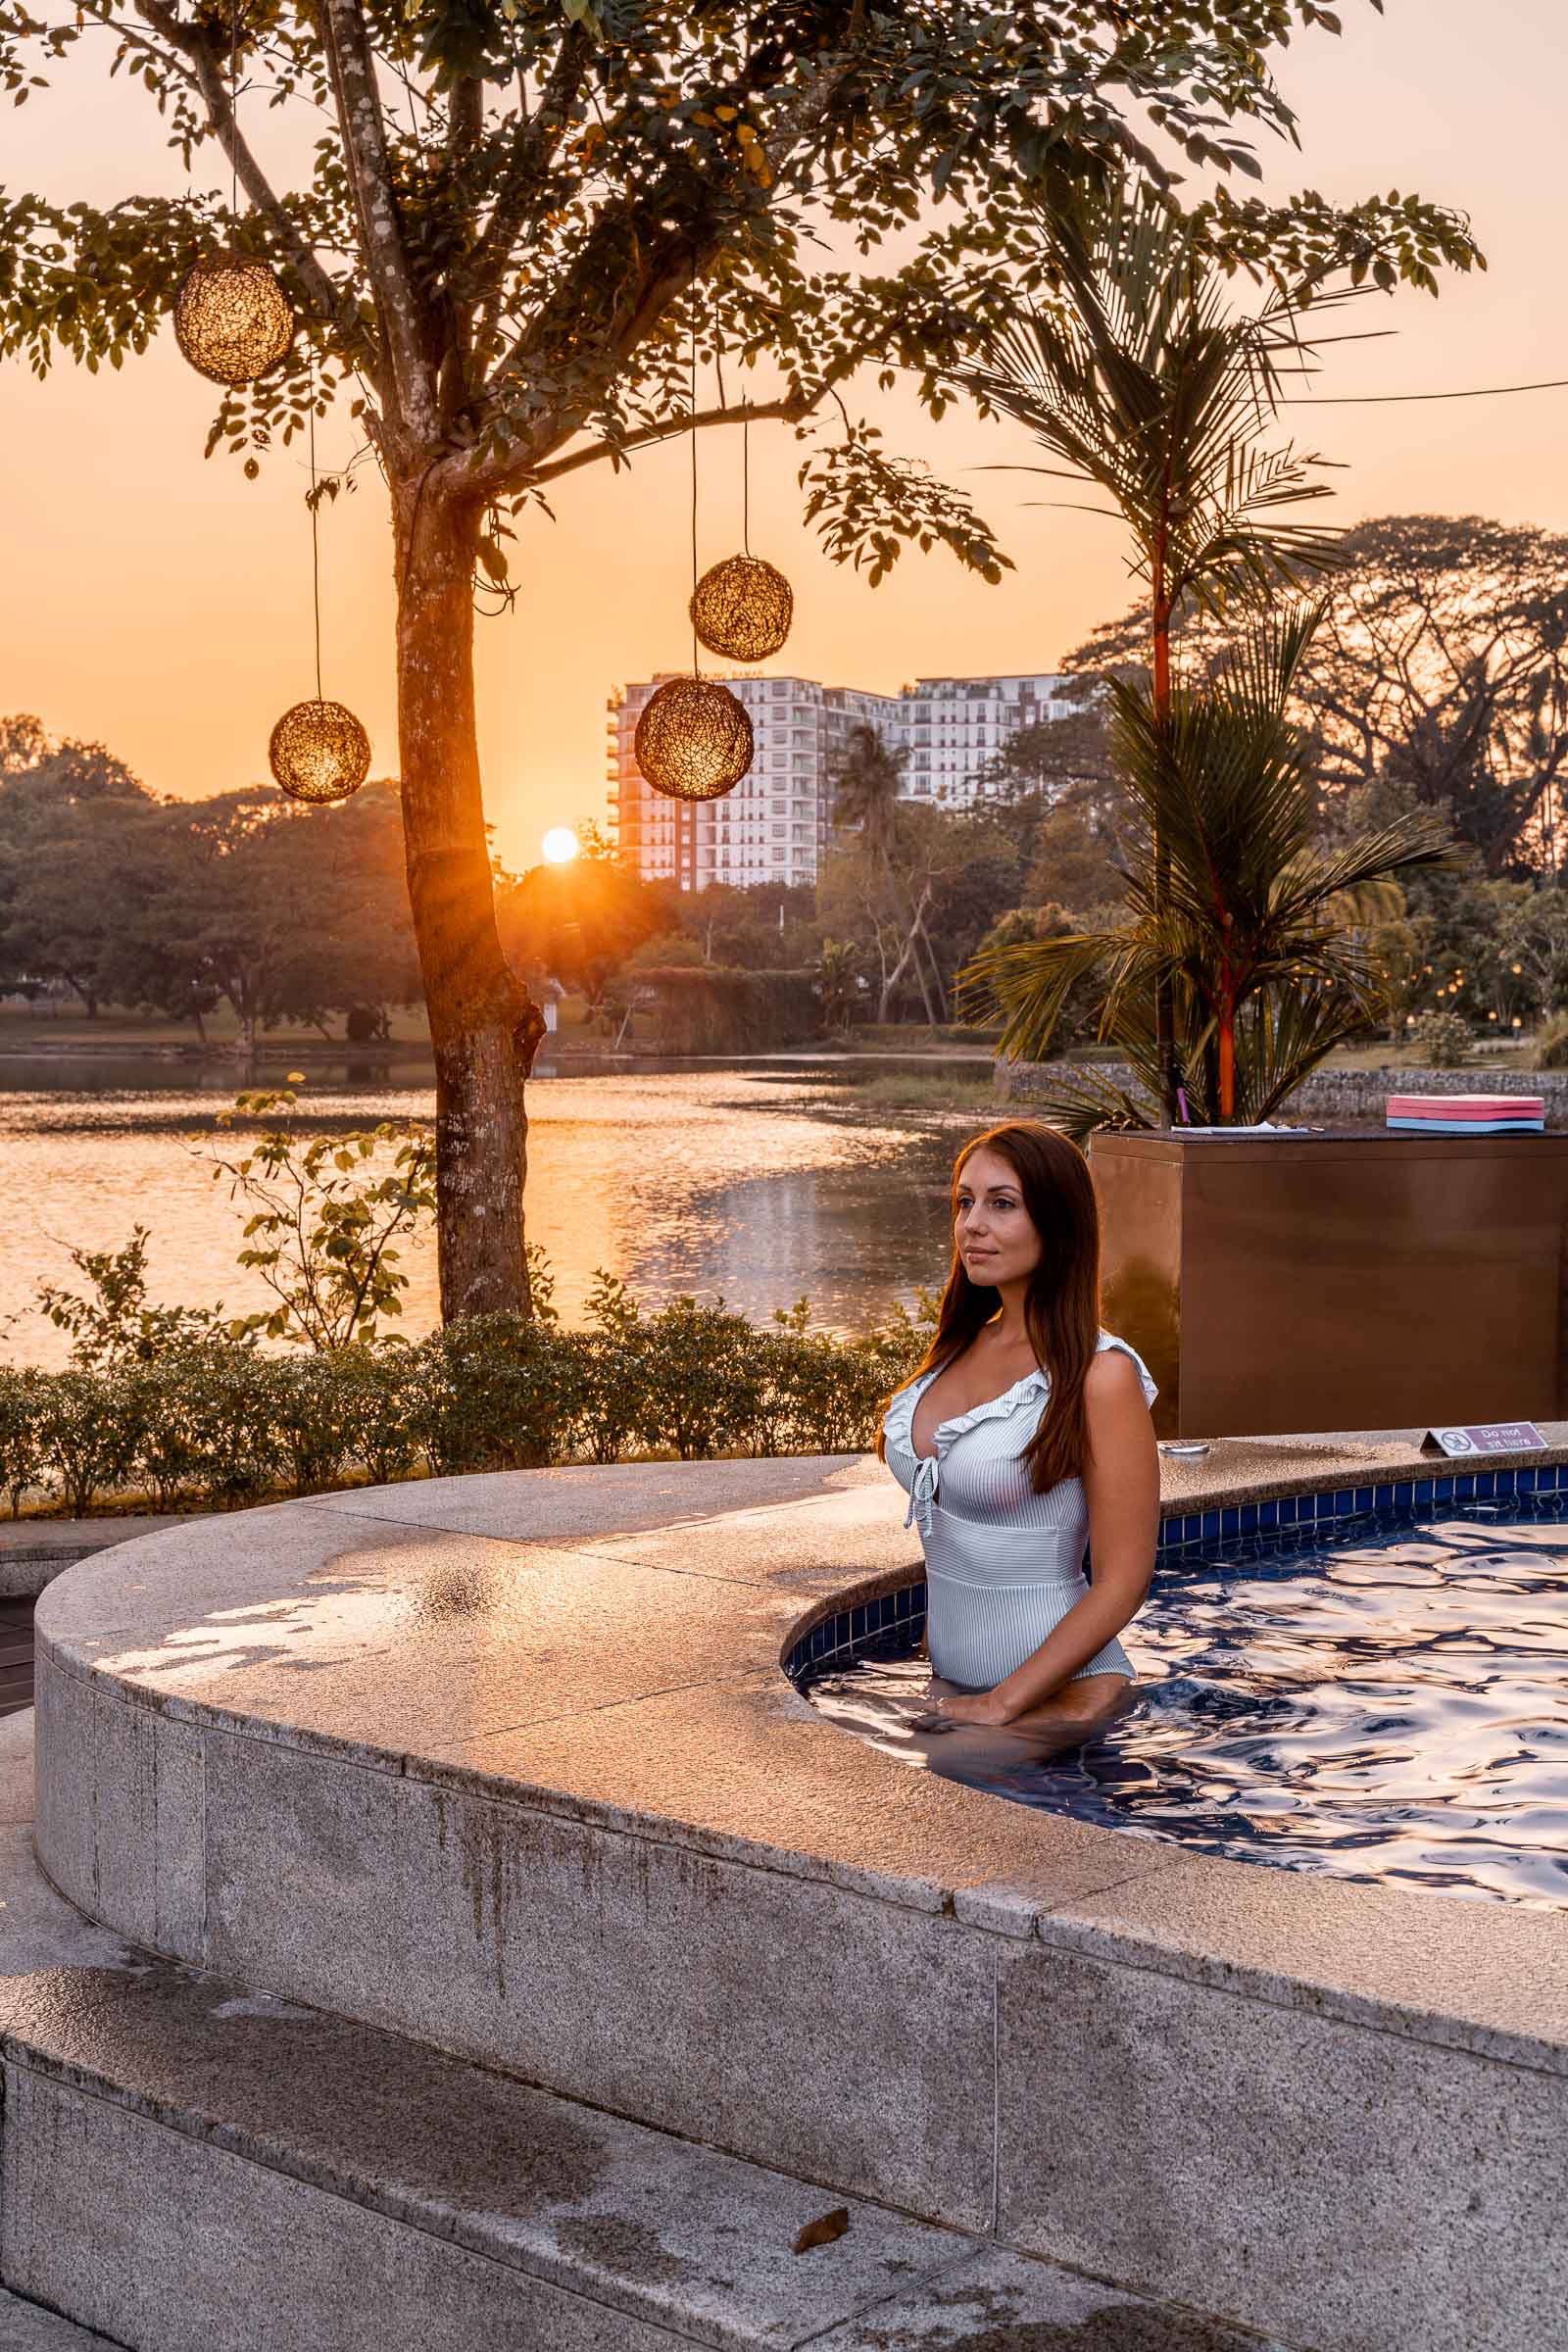 Girl in a blue bathing suit sitting in the hot tub watching the sunset at Lotte Hotel Yangon